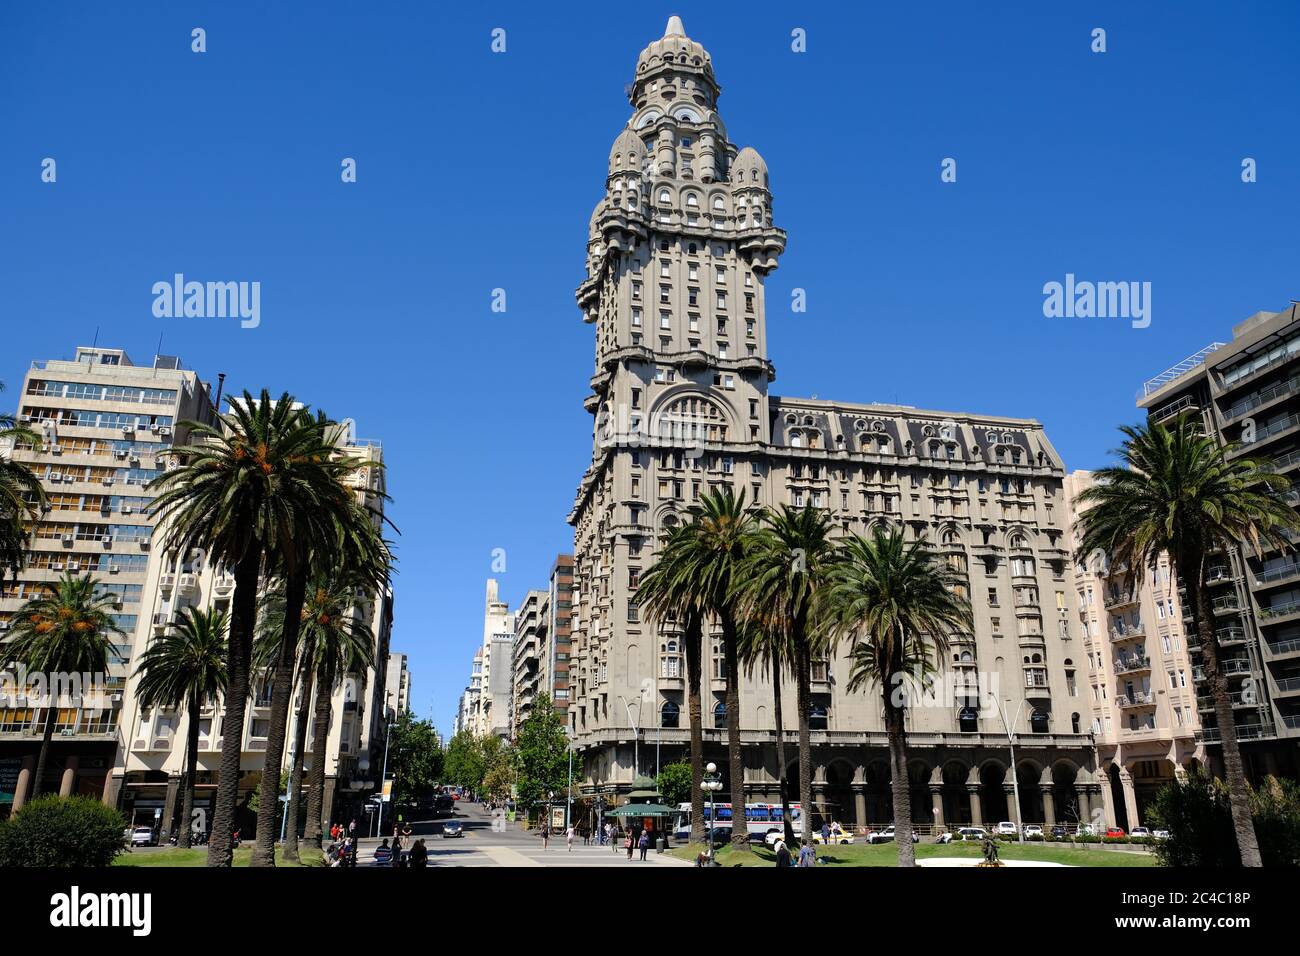 Uruguay Montevideo - Salvo Palace at Plaza Independencia - Independence Square Stock Photo